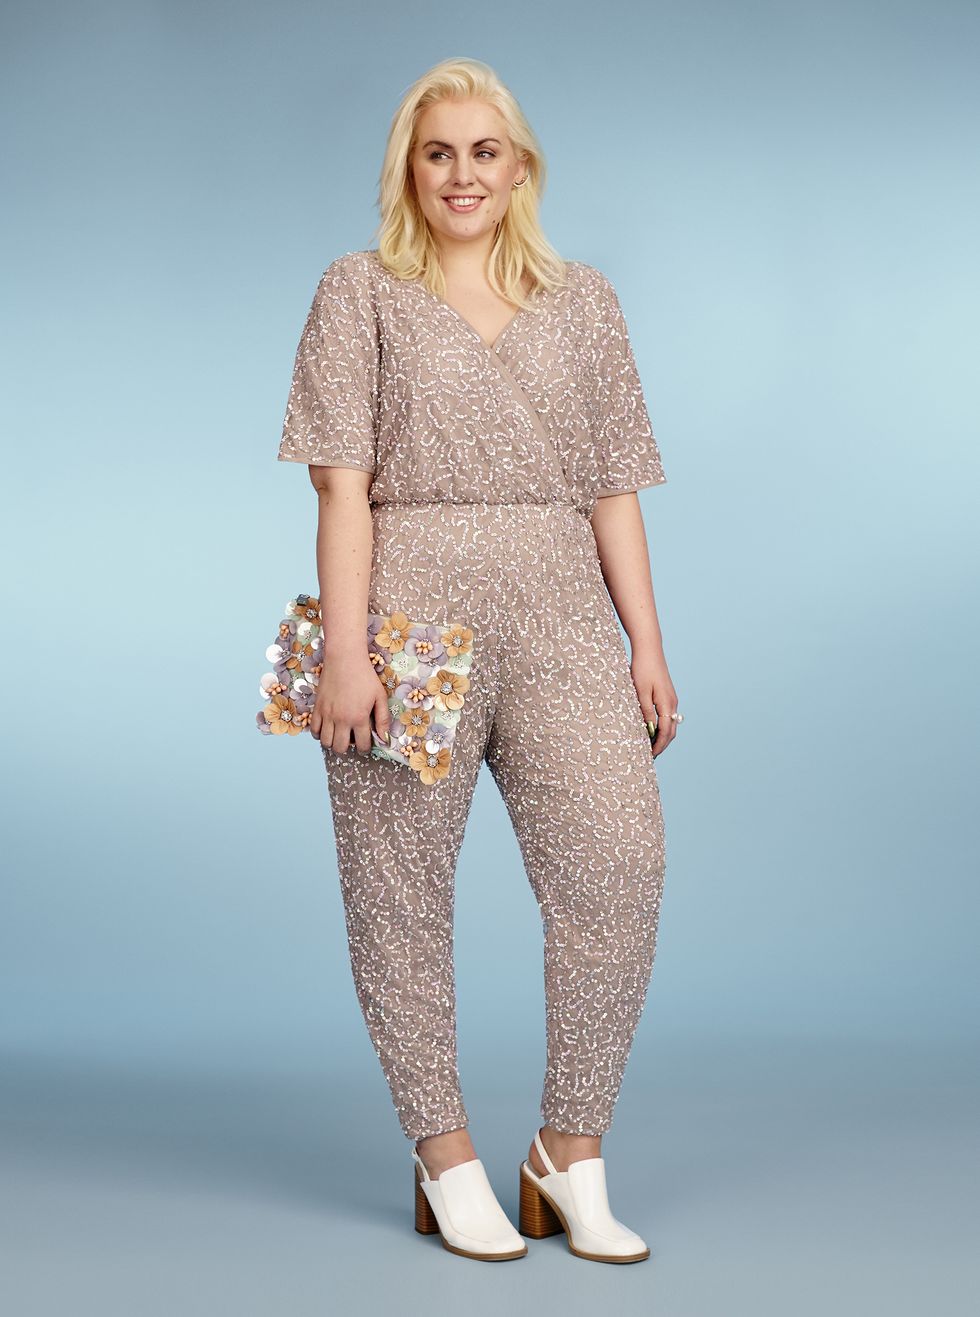 ASOS Curve Collection modelled by Felicity Hayward